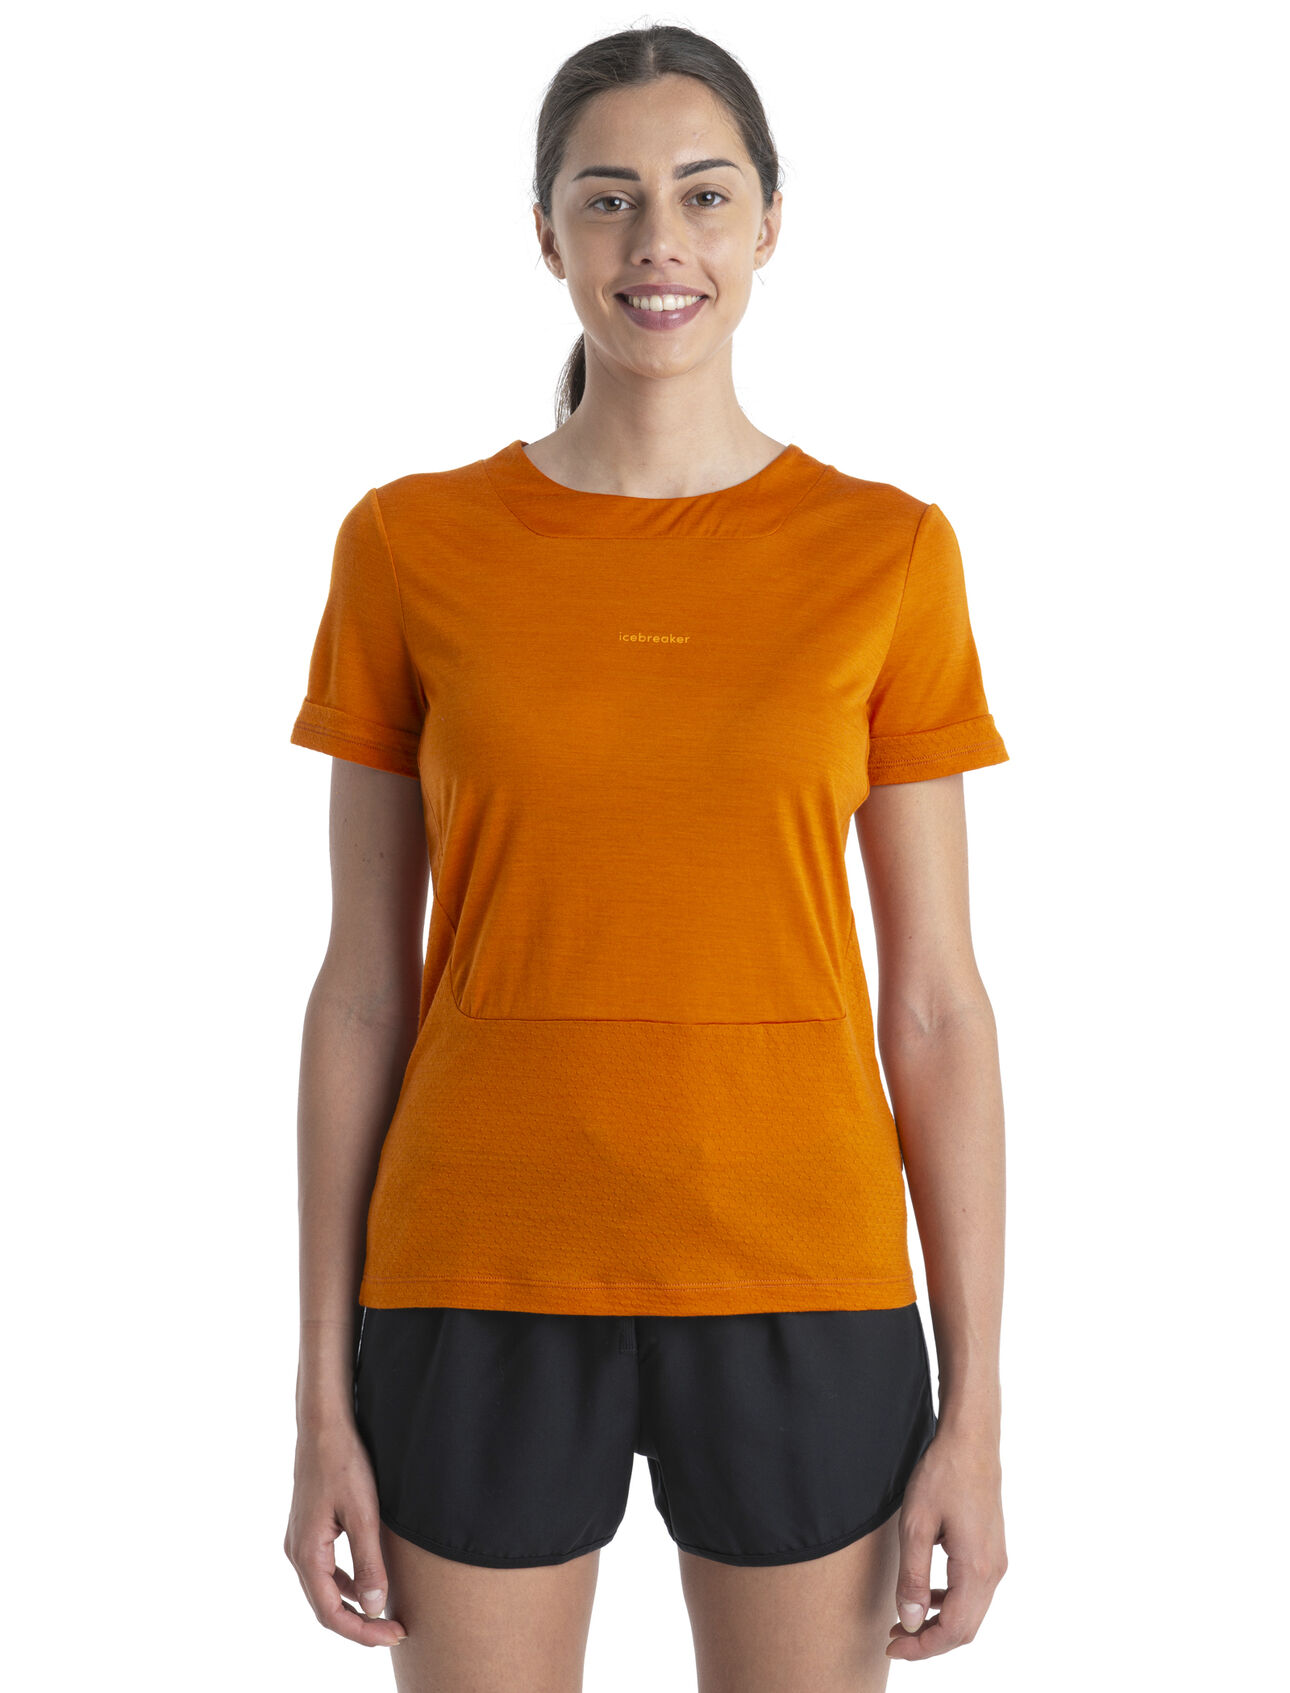 Womens ZoneKnit™ Merino Short Sleeve T-Shirt Our most breathable and lightweight tee for high-exertion activities, the ZoneKnit™ Short Sleeve Tee features a clean design with mesh panels to help regulate your body temperature.